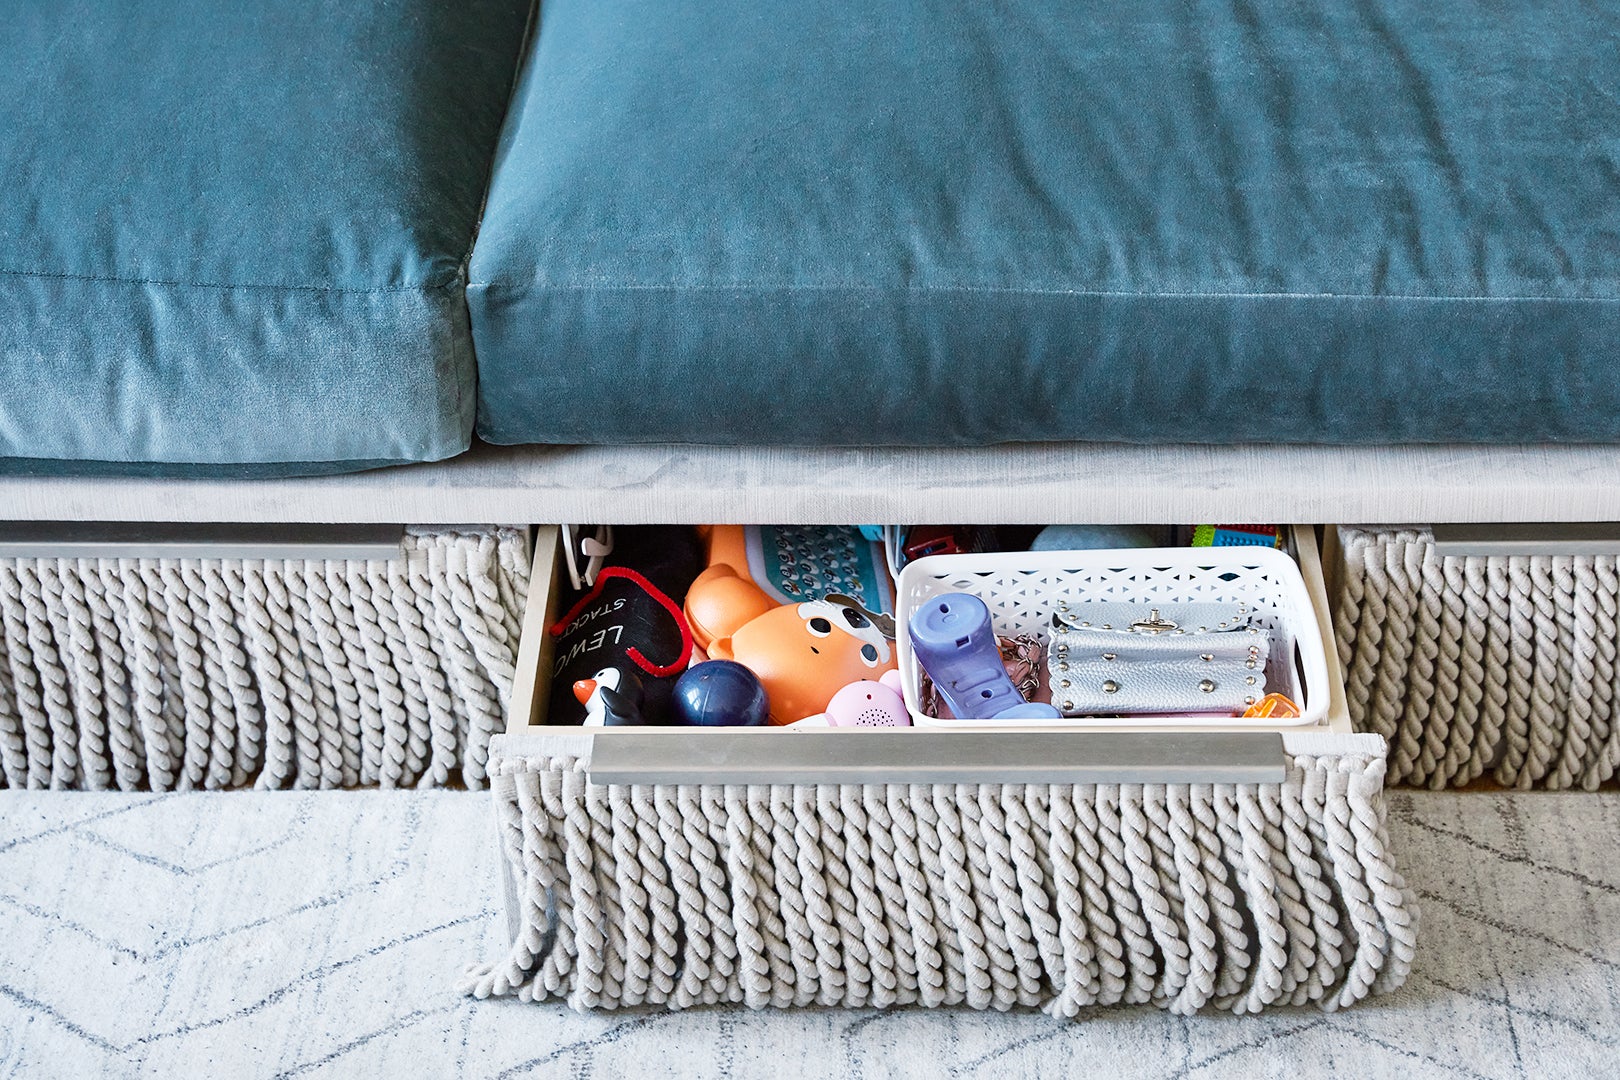 sofa drawer open with toys in it